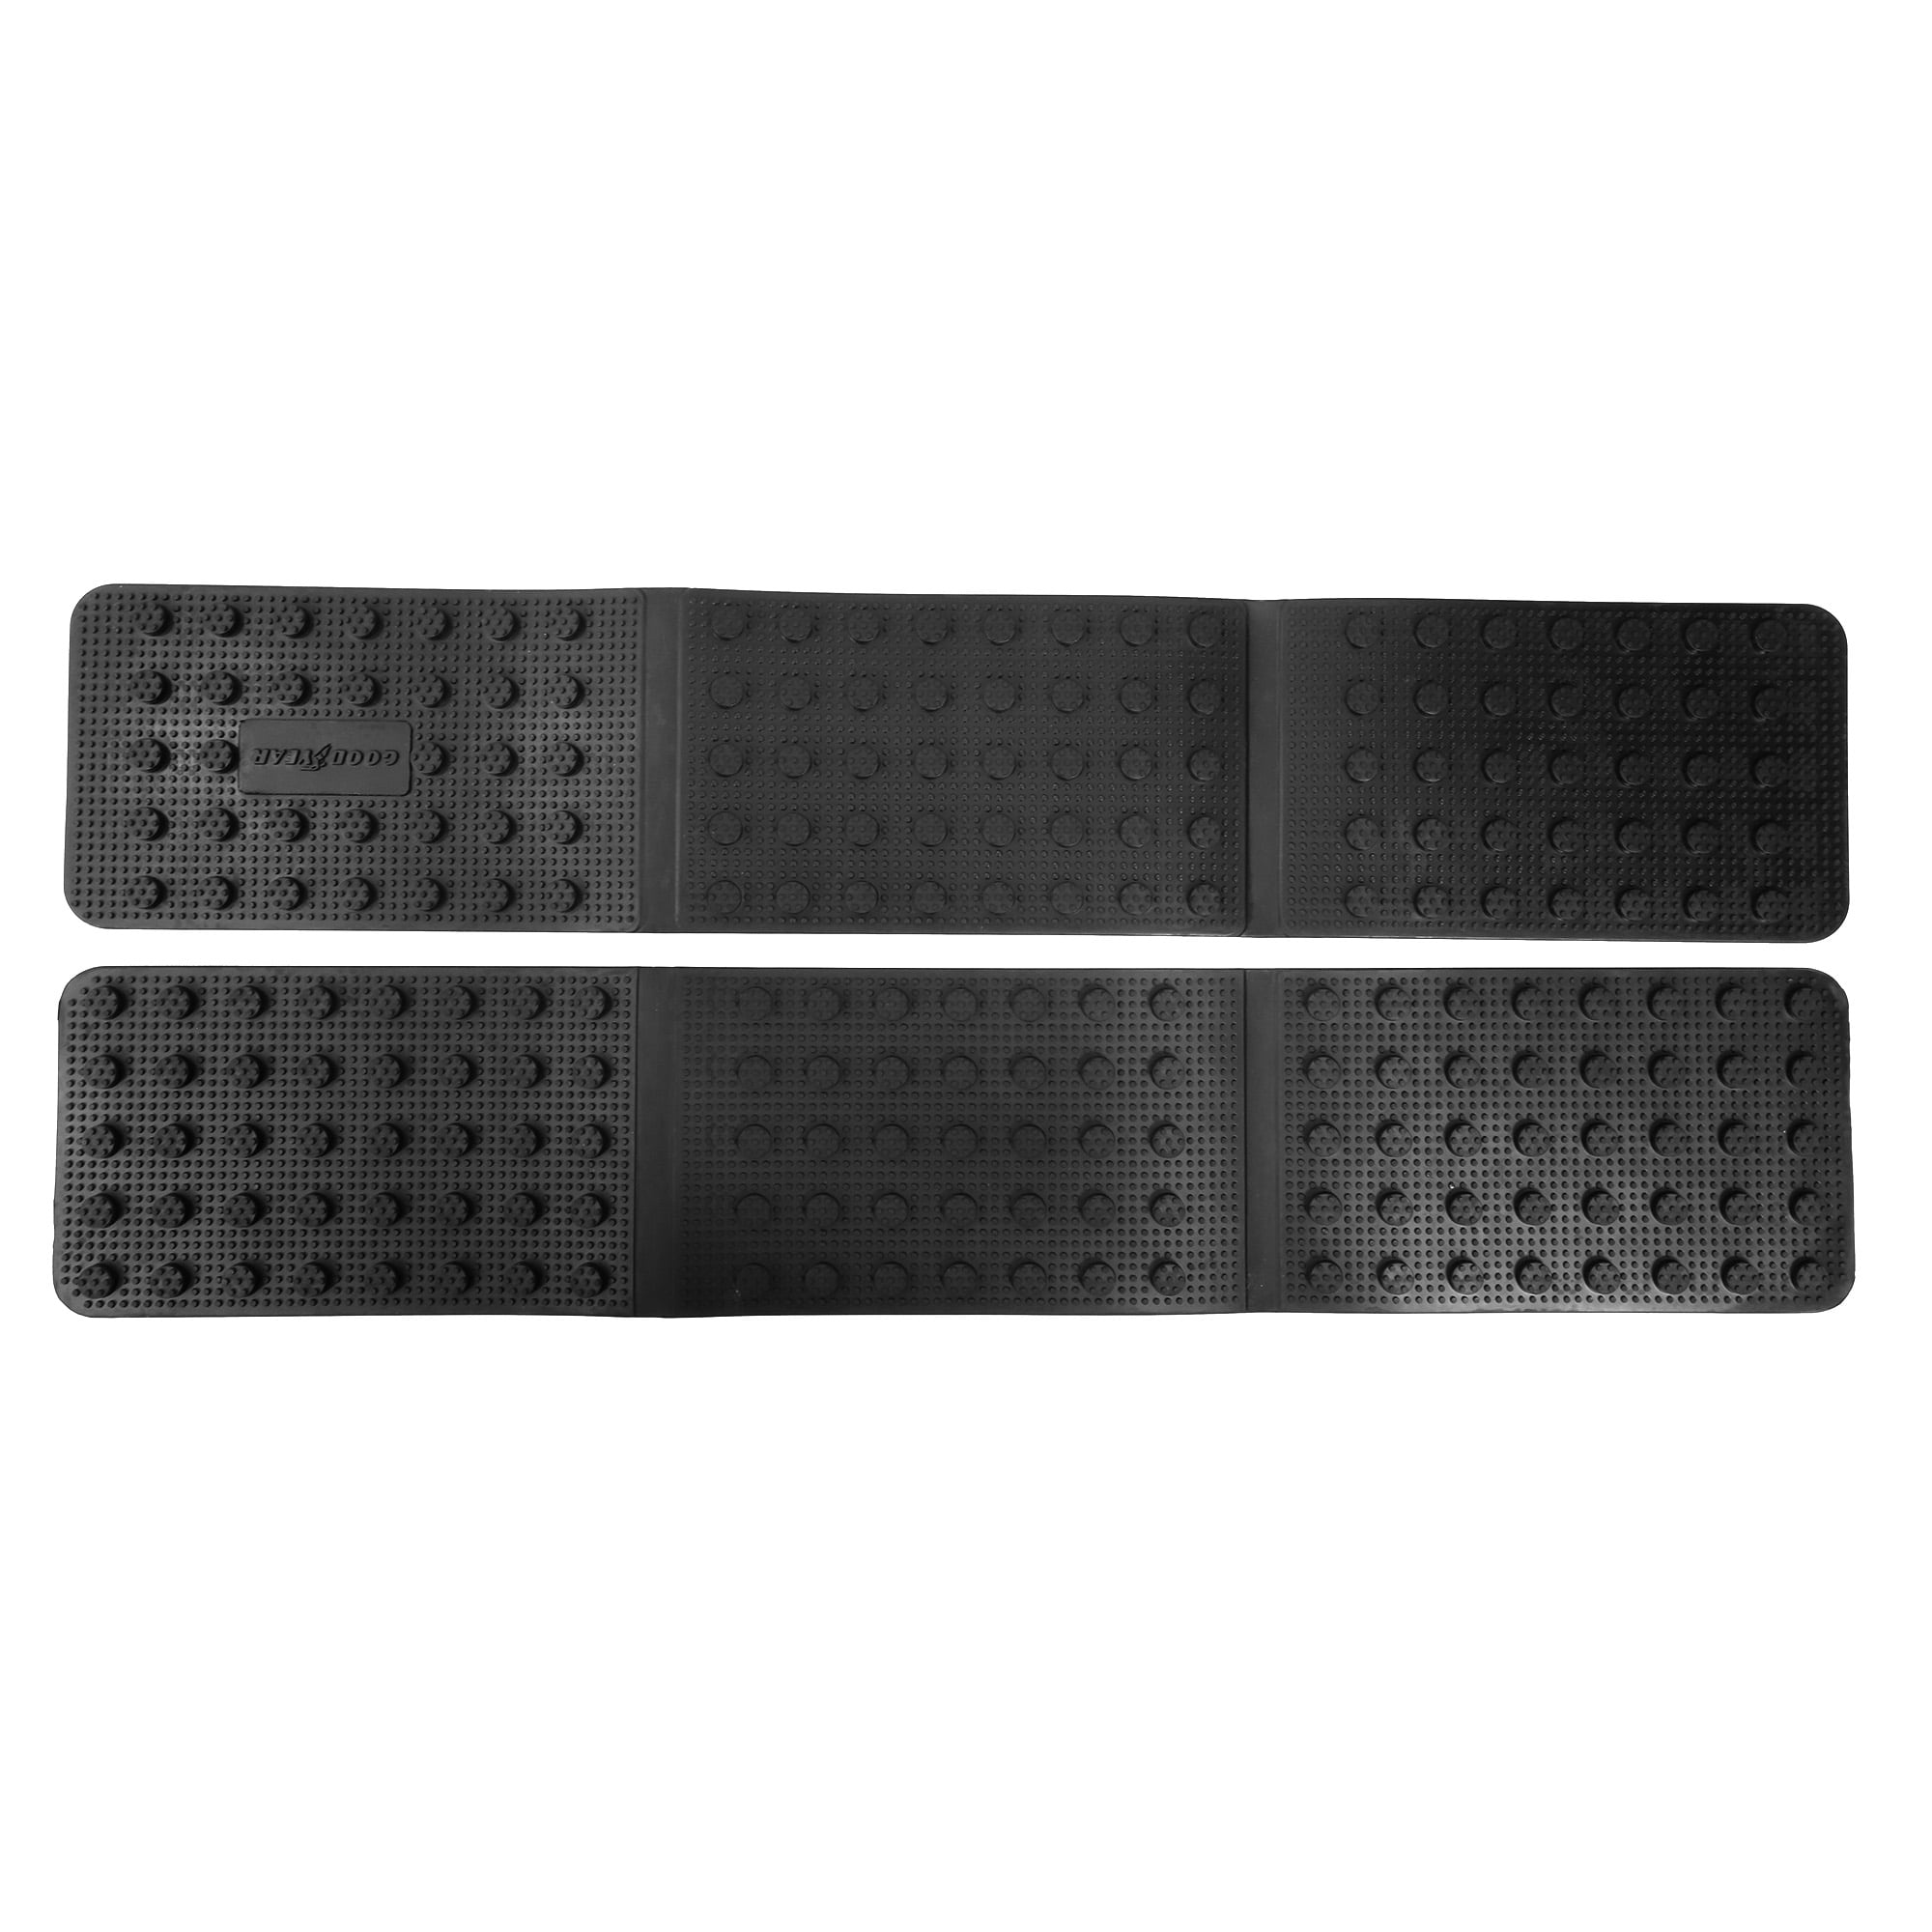 Goodyear 2-Pack Durable Black Rubber Traction Mats, for Vehicles. Features  Patented Design. 